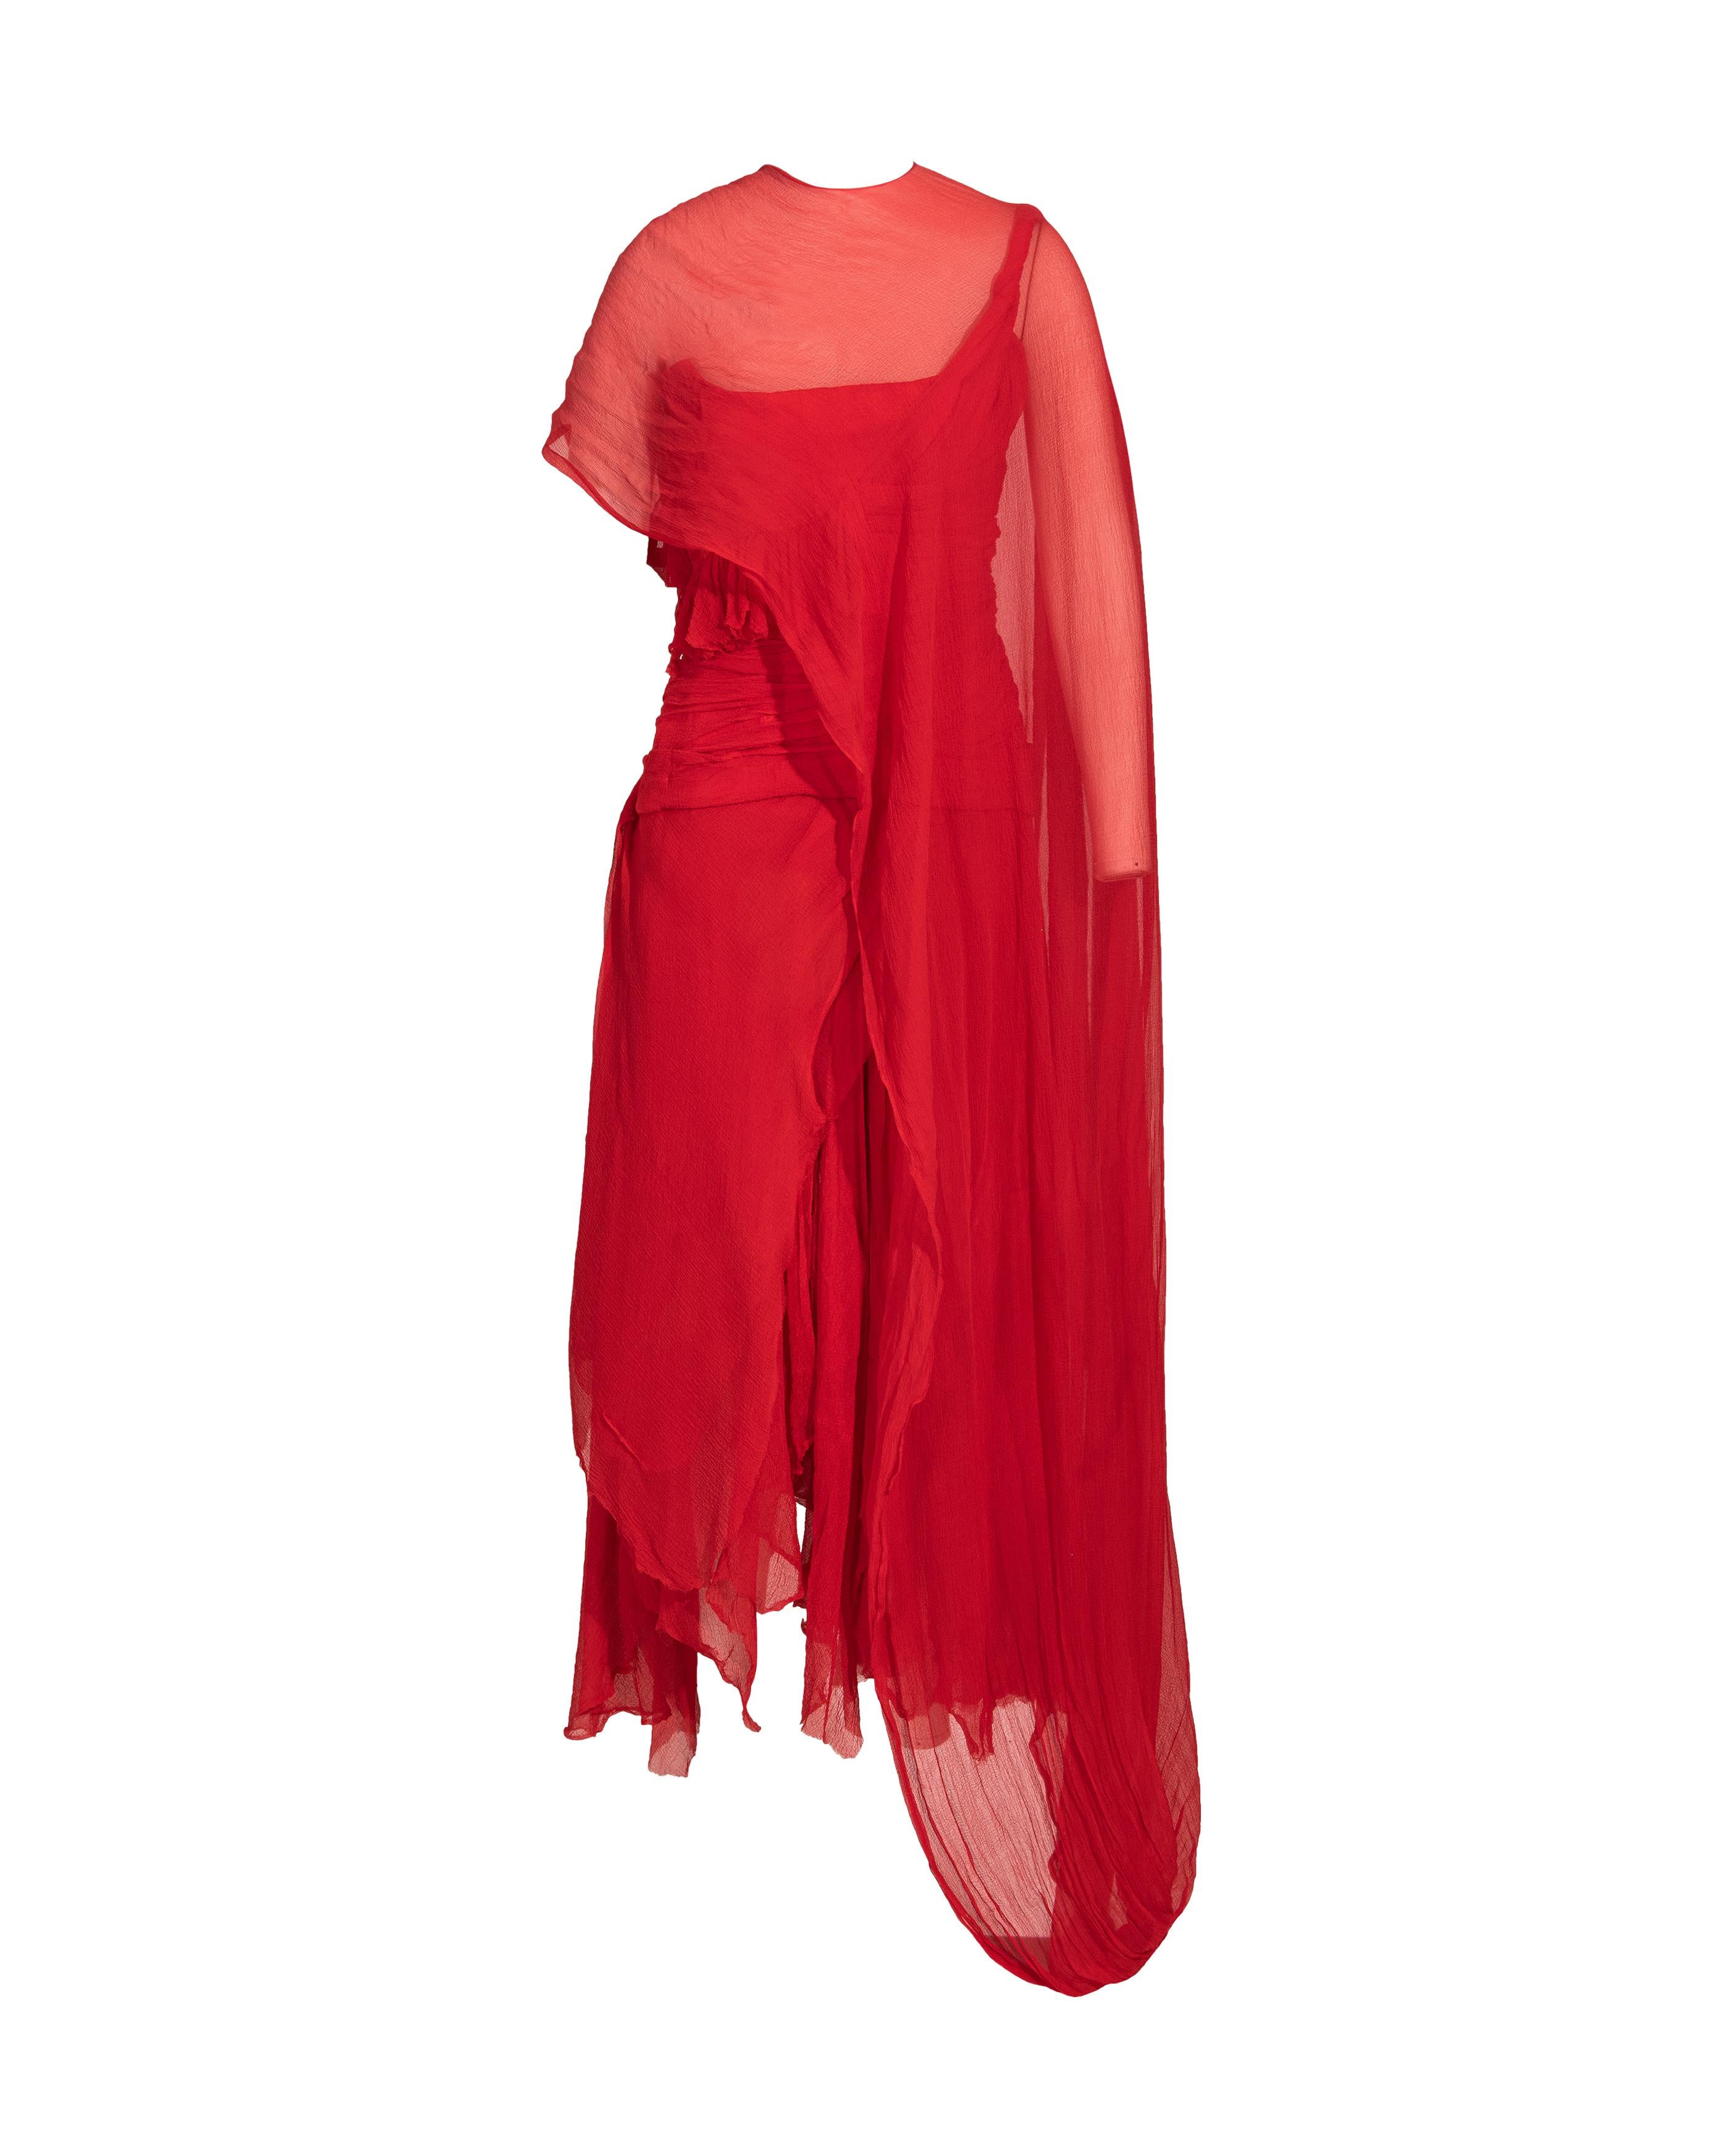 S/S 2003 Alexander McQueen  'Irere' Collection Red Silk Chiffon Gown with Sash For Sale 8